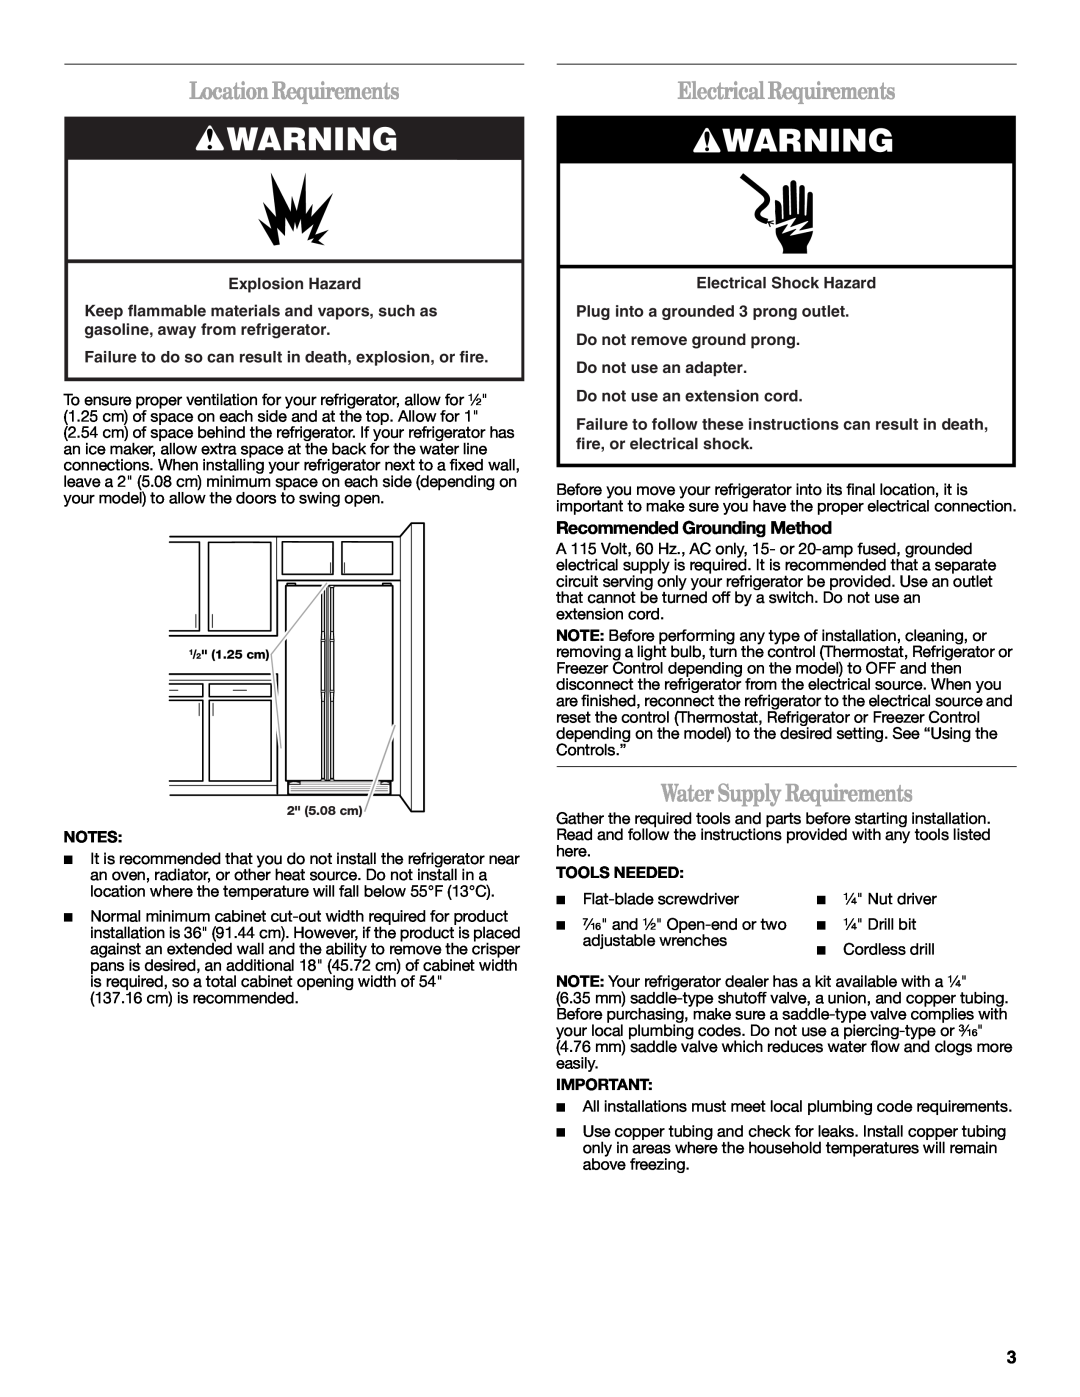 Whirlpool W10321467A LocationRequirements, Electrical Requirements, Water Supply Requirements, Explosion Hazard 